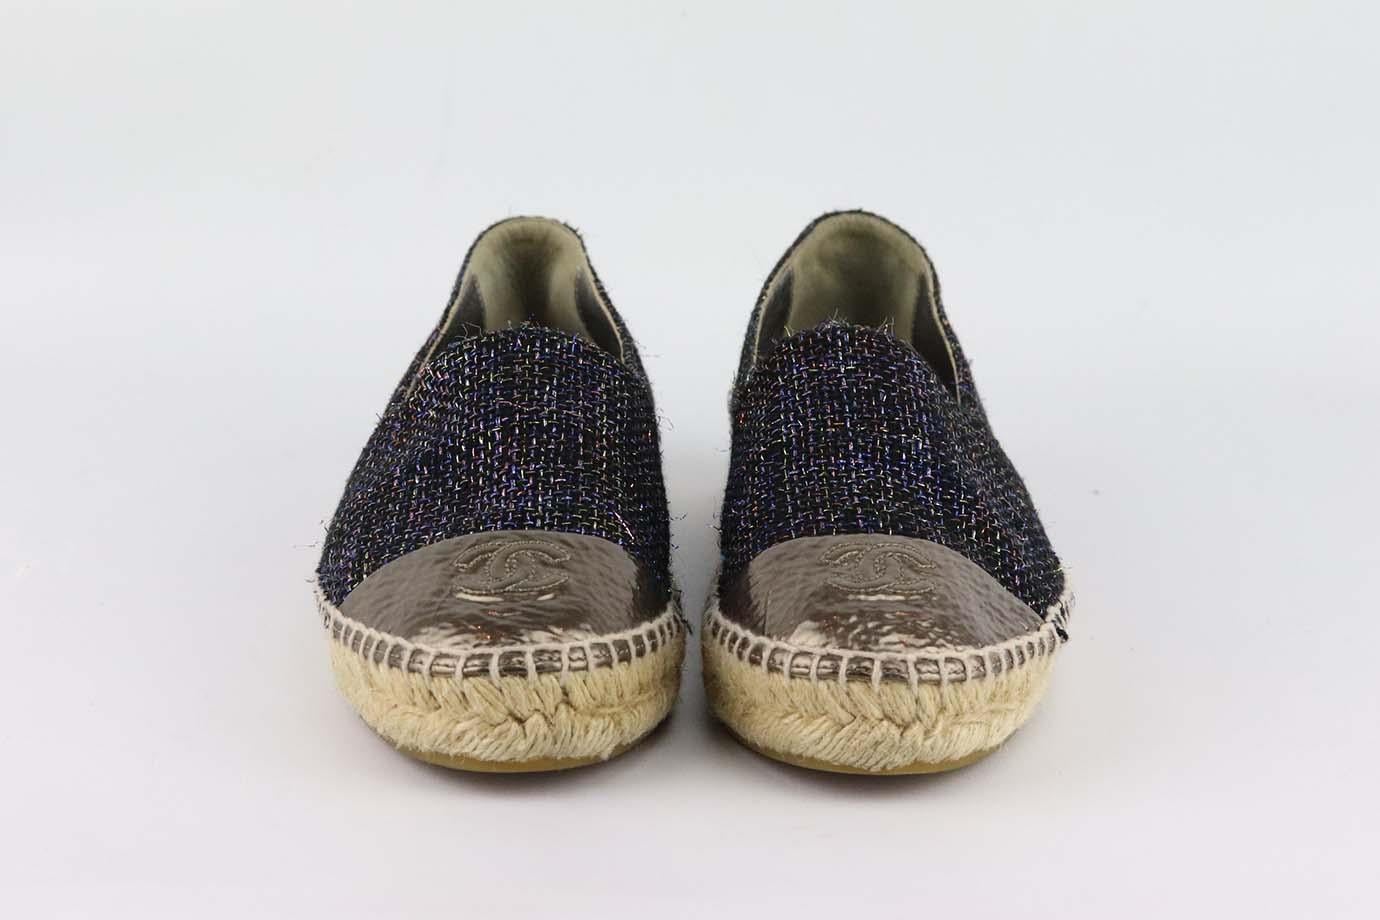 Chanel may specialize in luxurious bags, but the brand also designs great pieces, these espadrilles are made from metallic navy tweed with silver CC embroidered toe-cap, it also has a leather foot bed with gripped soles for comfort and grip. Sole